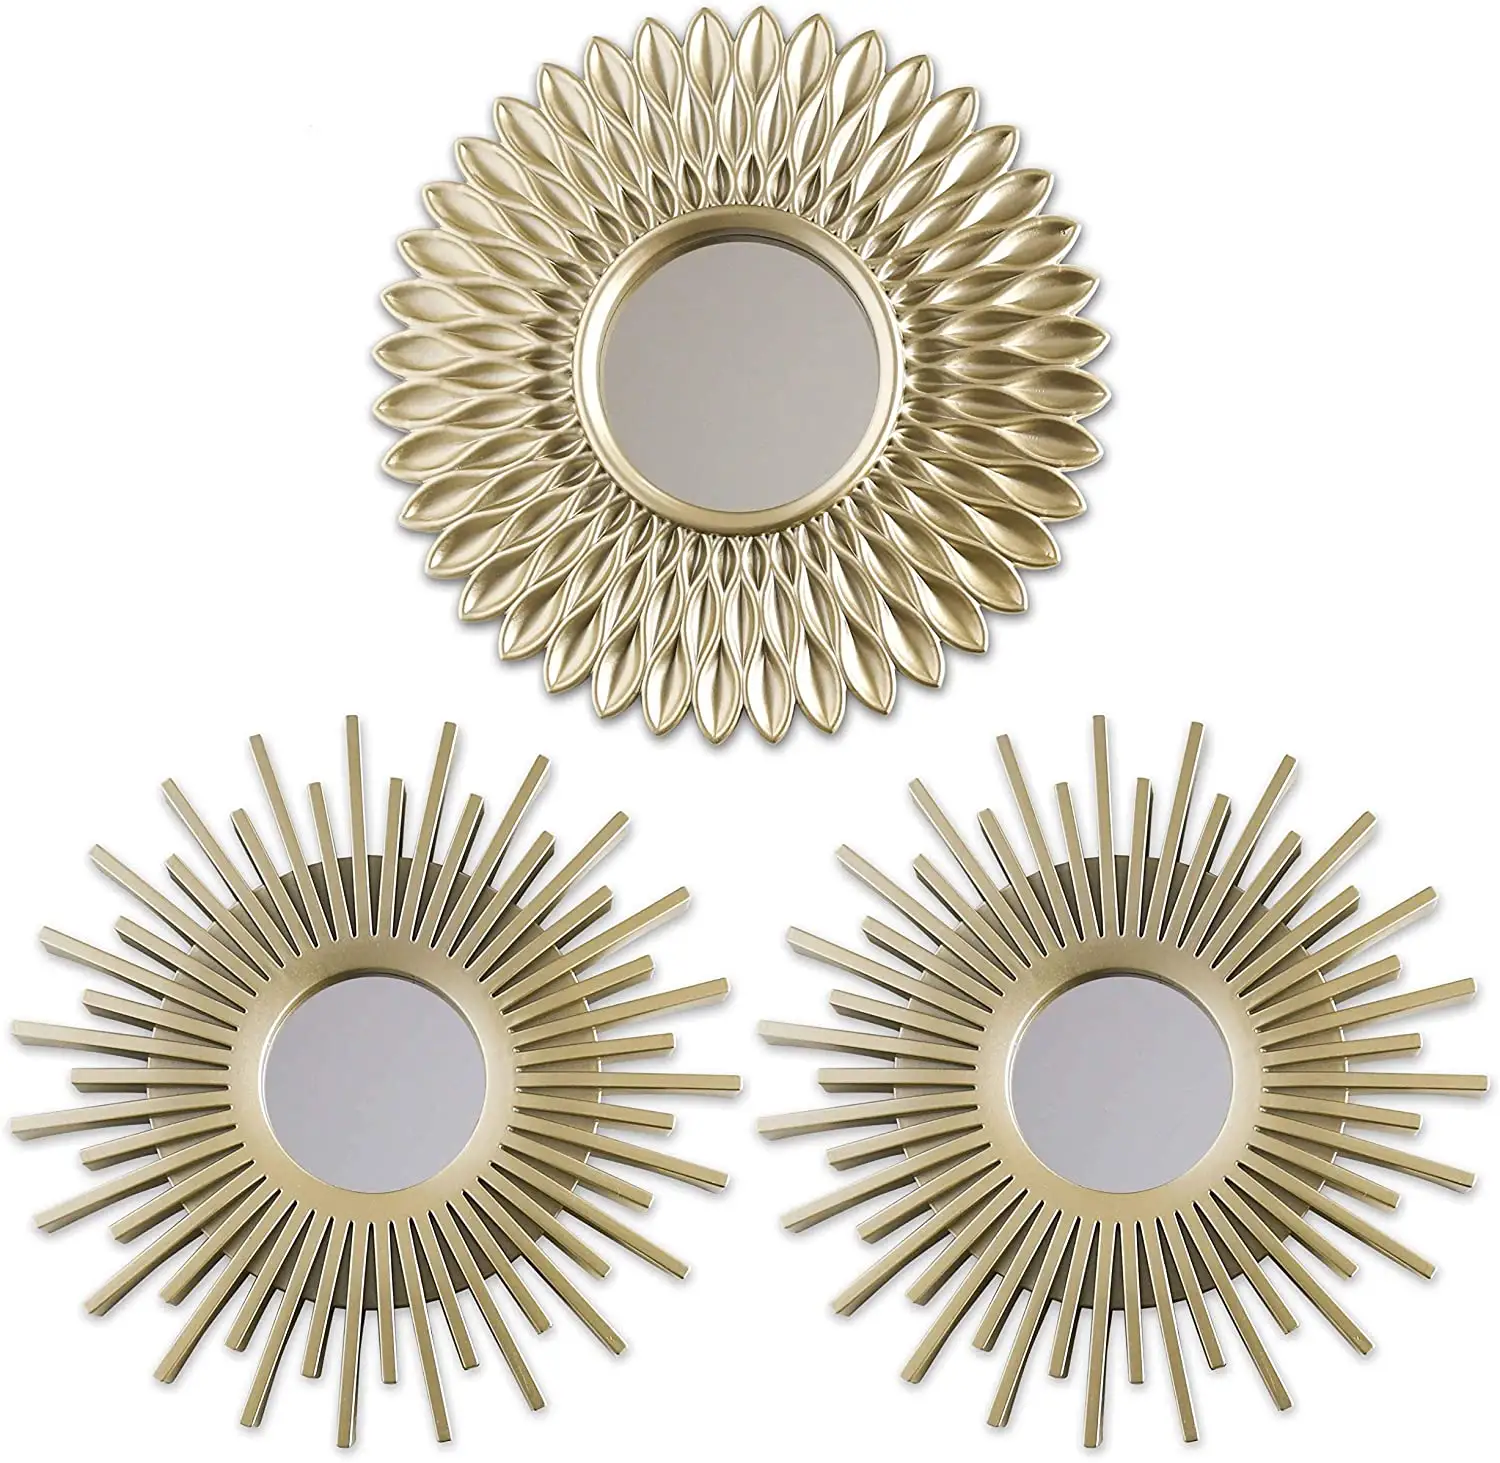 Gold Round Modern Mirrors 3 Pack Room Home Decor Wall Mirrors